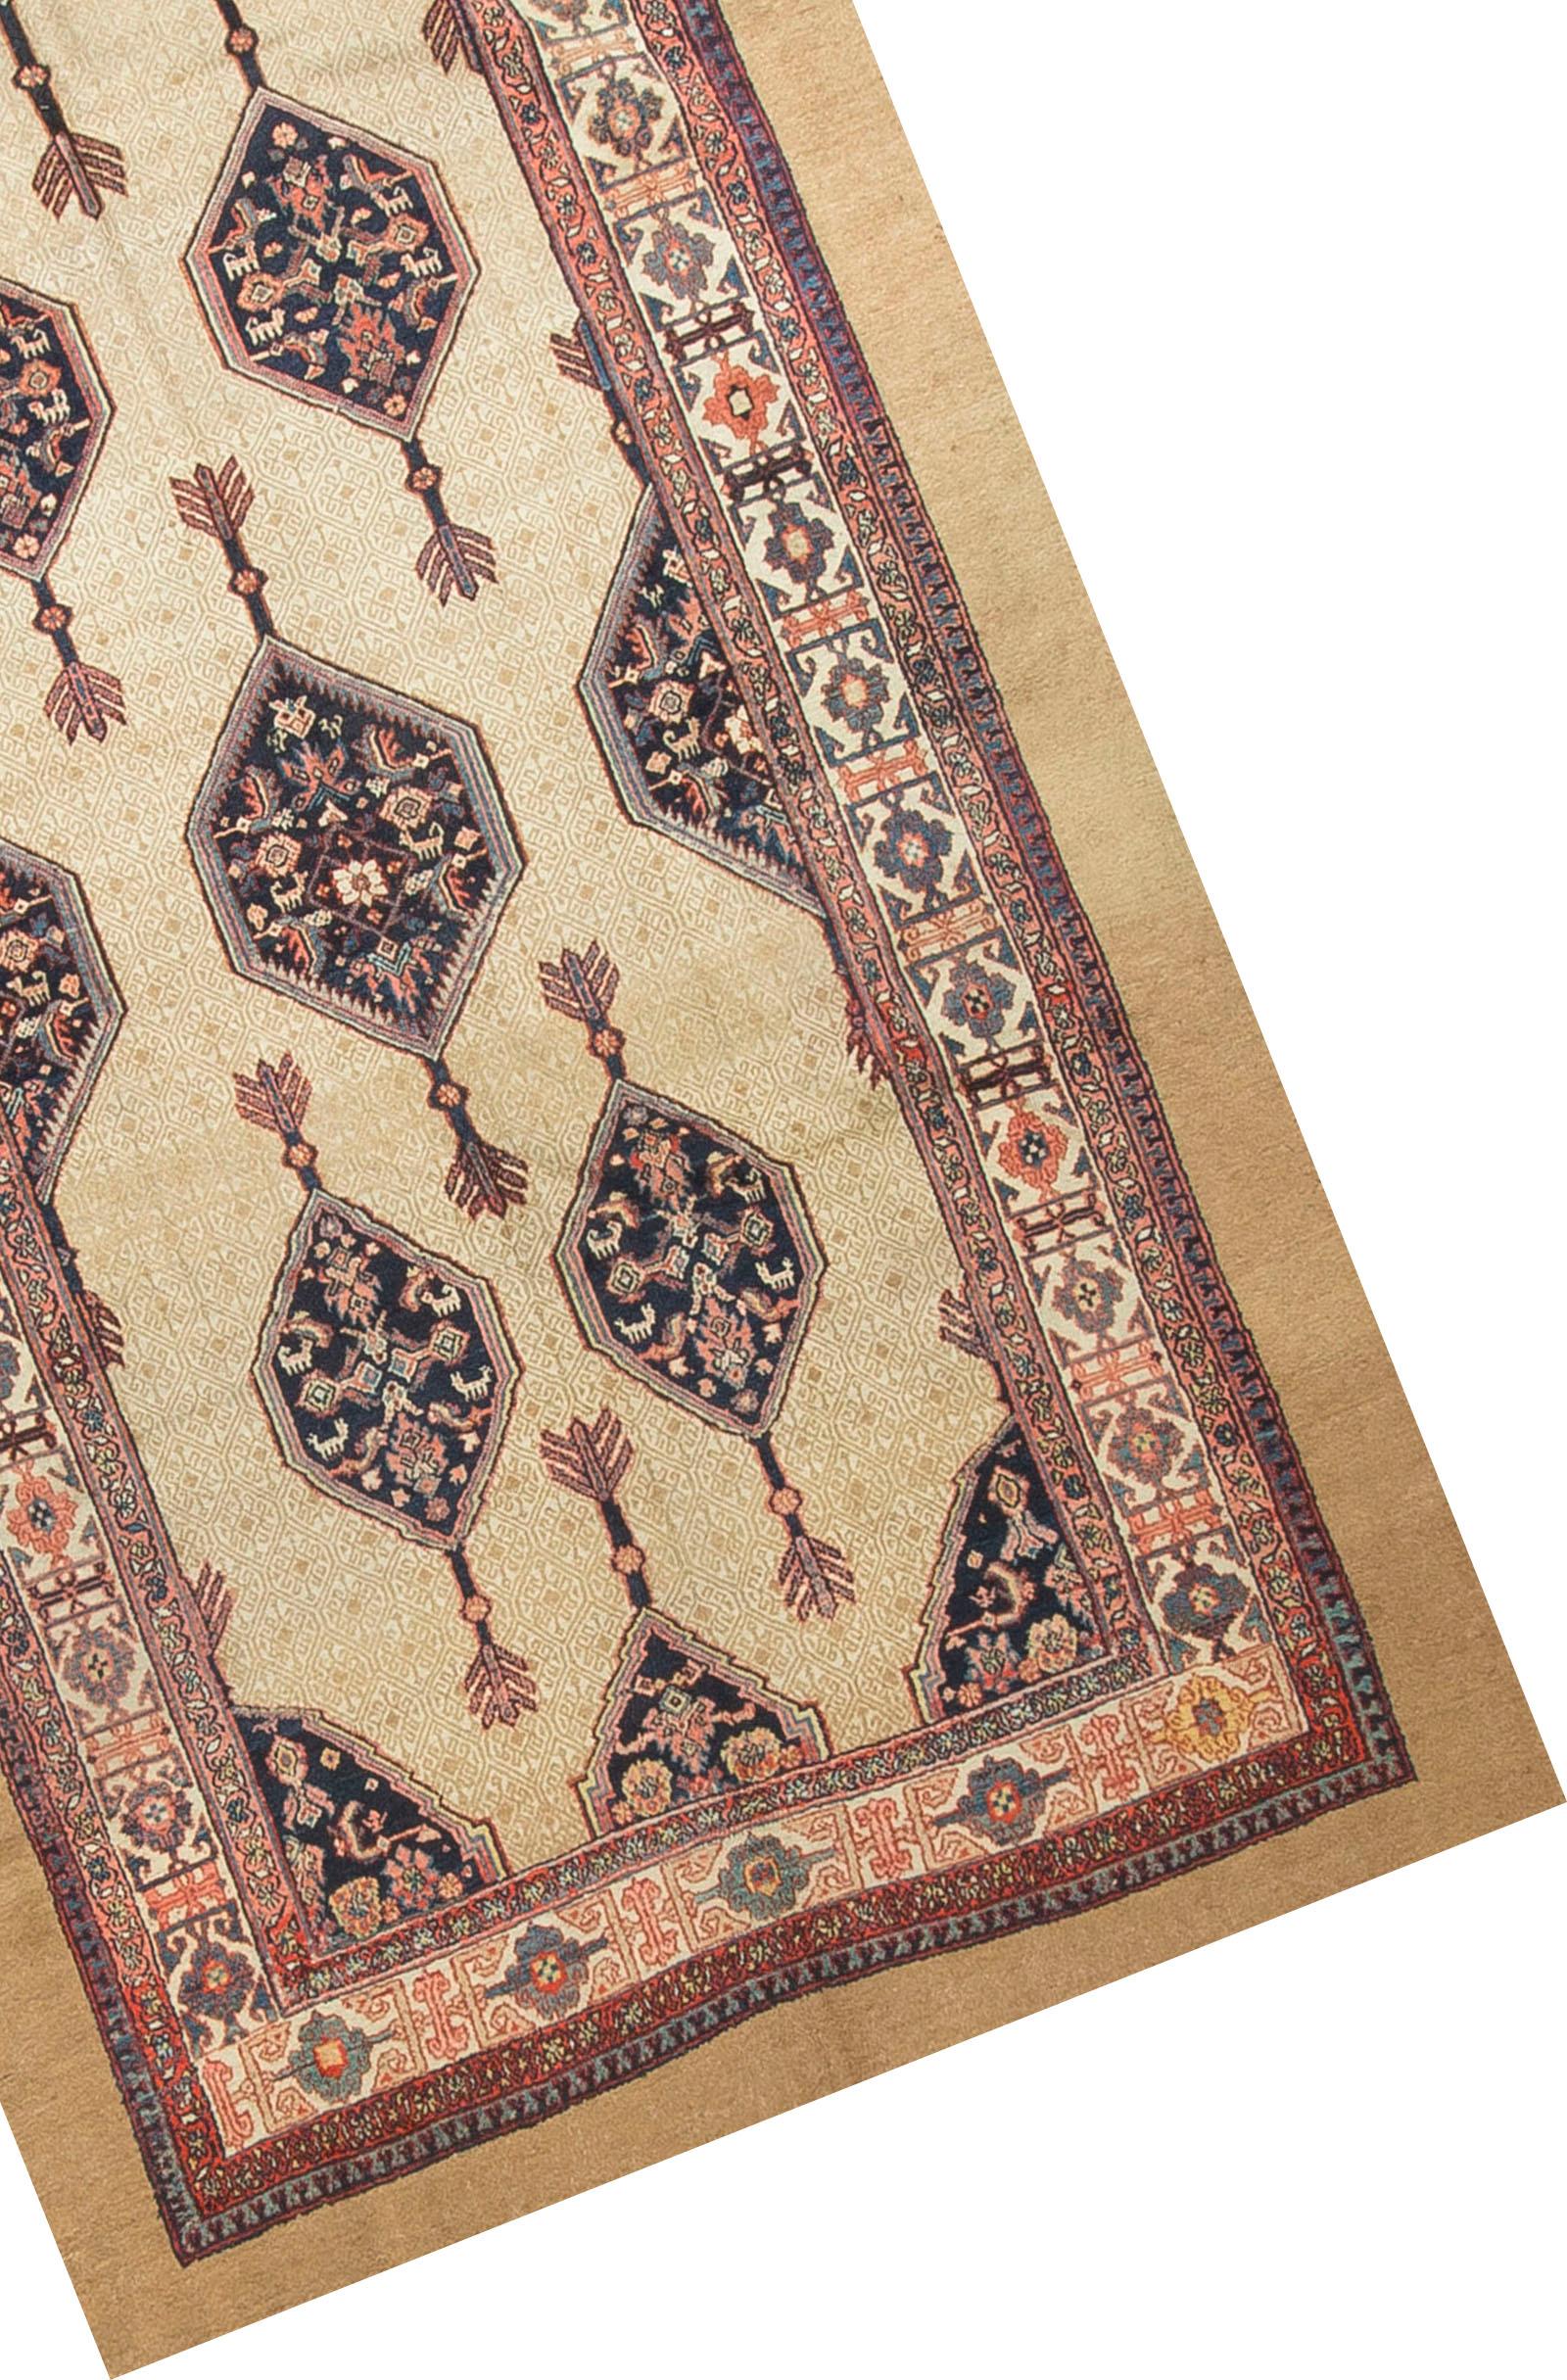 Vintage Persian Serab Camel Hair Rug In Good Condition For Sale In Secaucus, NJ